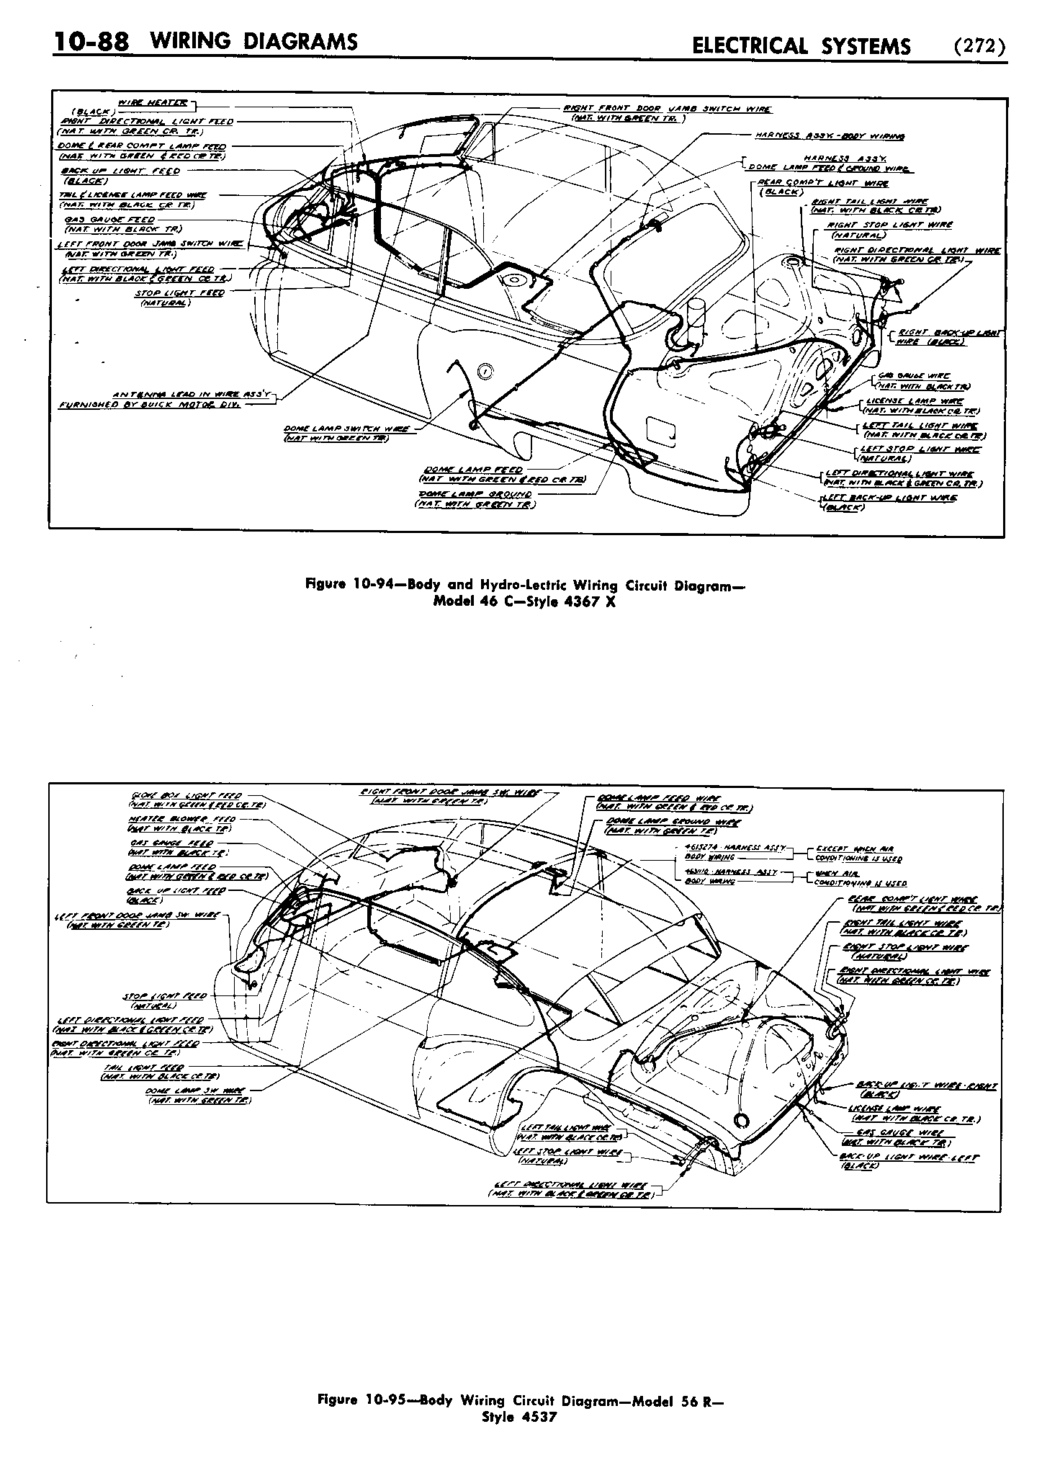 n_11 1953 Buick Shop Manual - Electrical Systems-089-089.jpg